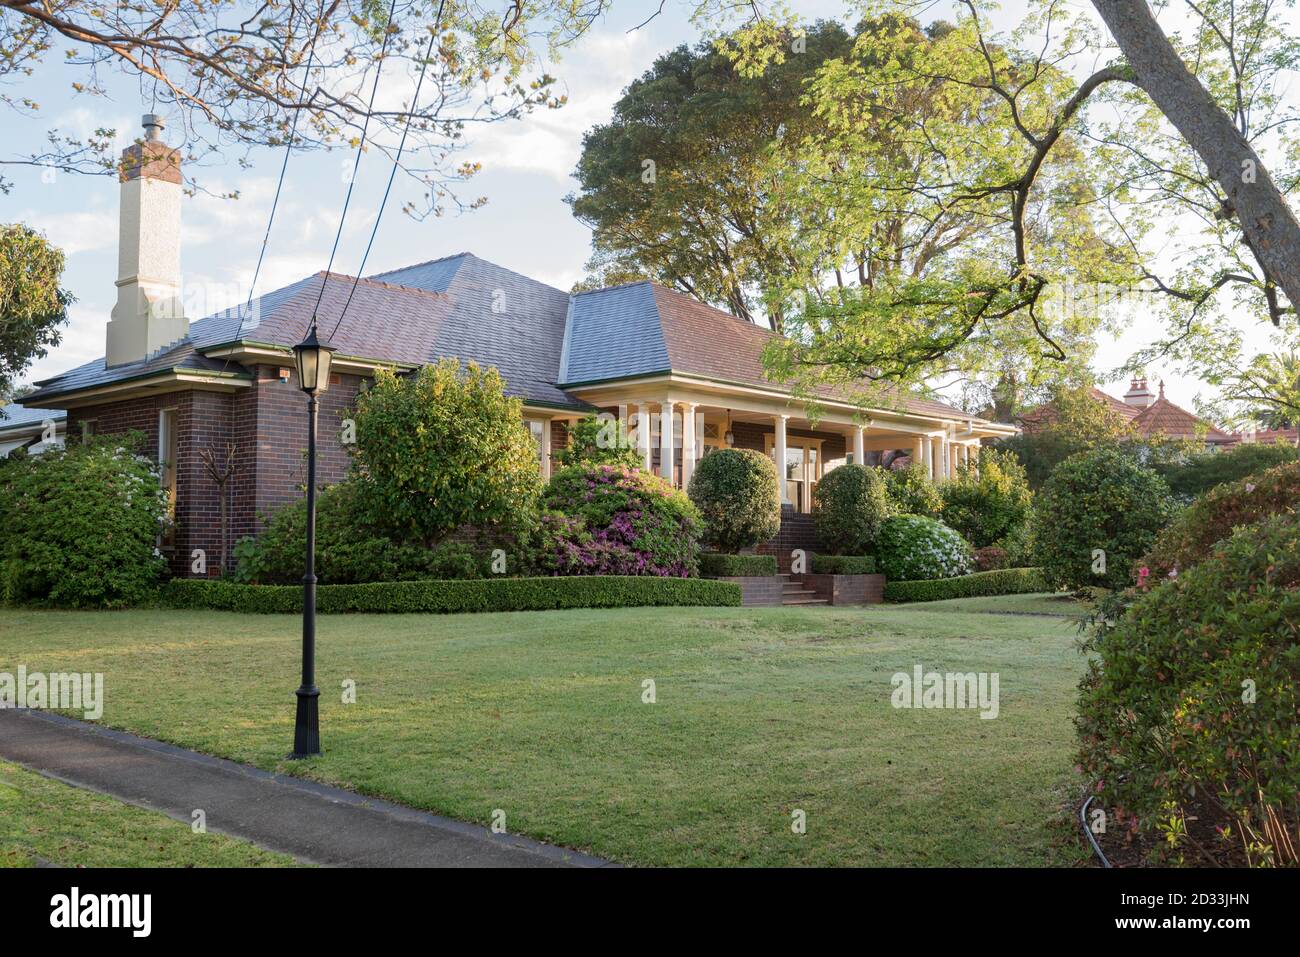 A large slate roof California Bungalow/Colonial Revival style home home with an extensive garden on the east side of Gordon, Sydney, Australia Stock Photo